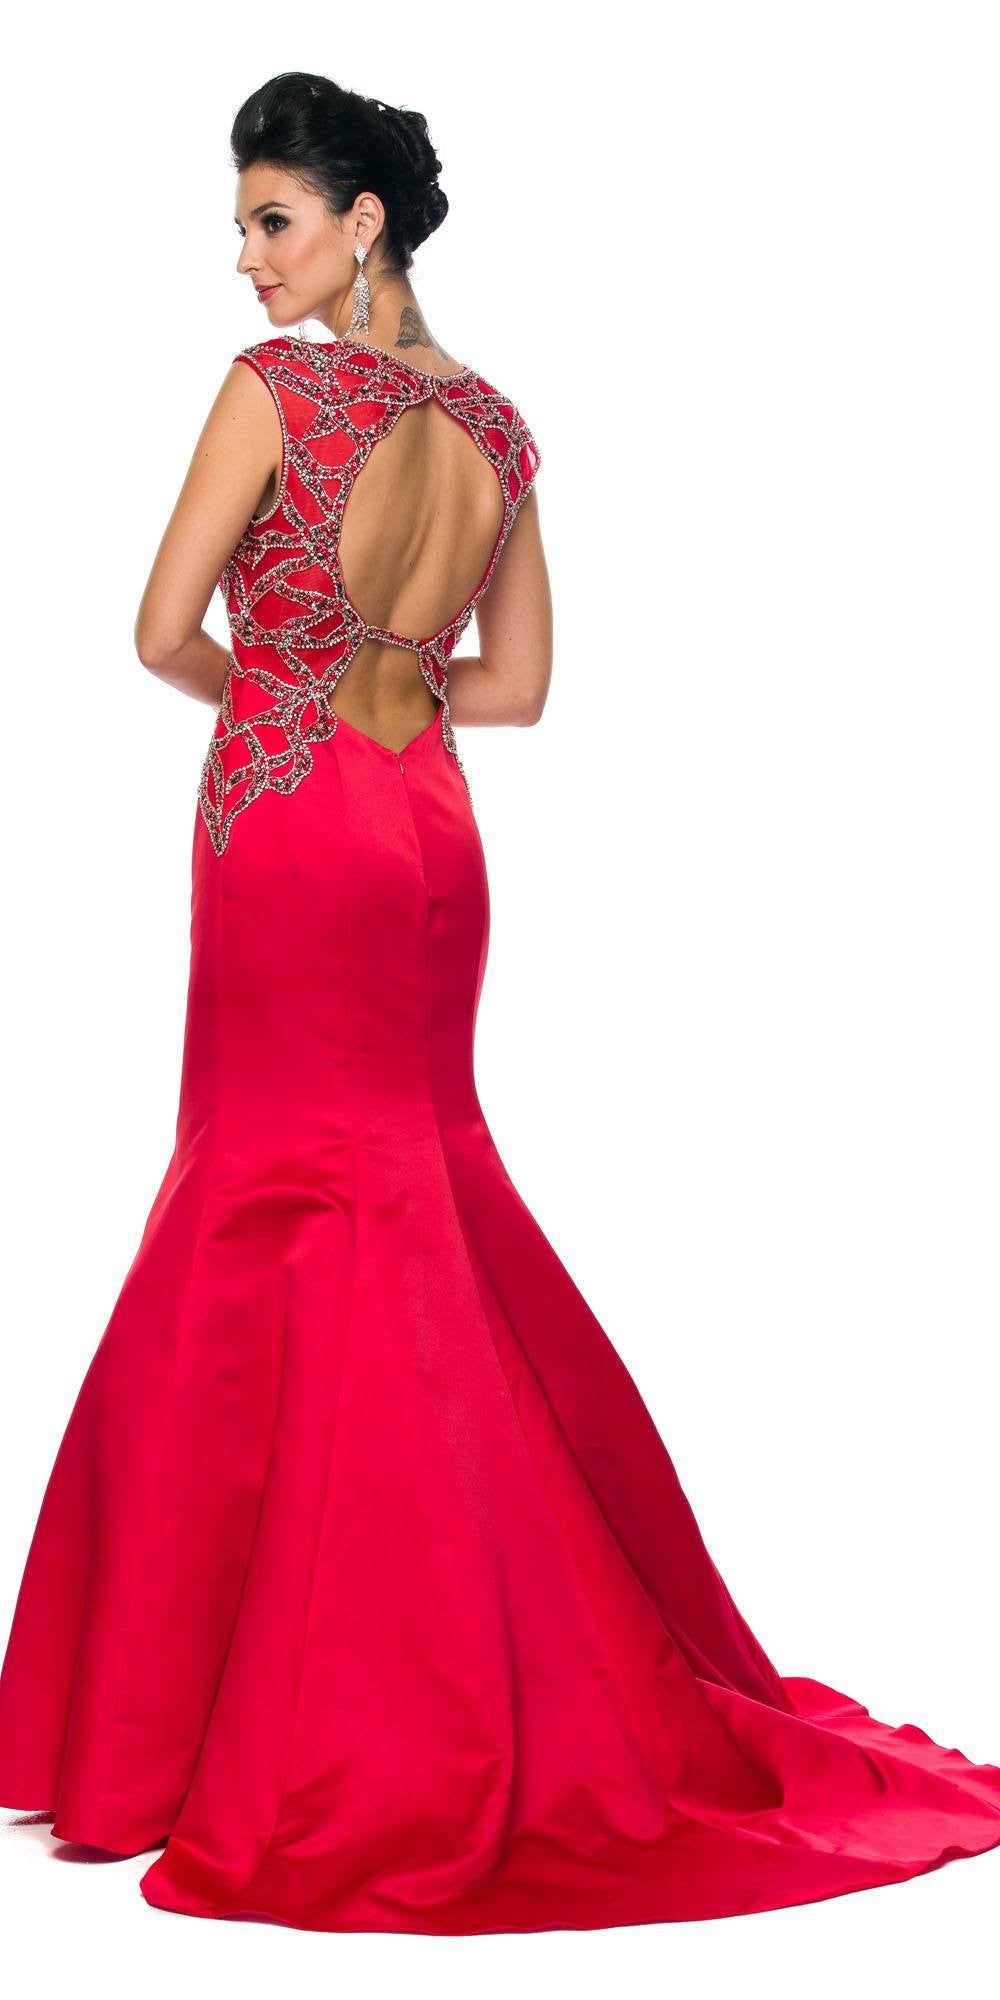 Juliet 624 Jeweled Bodice Mermaid Style Formal Gown Cut Out Back Red